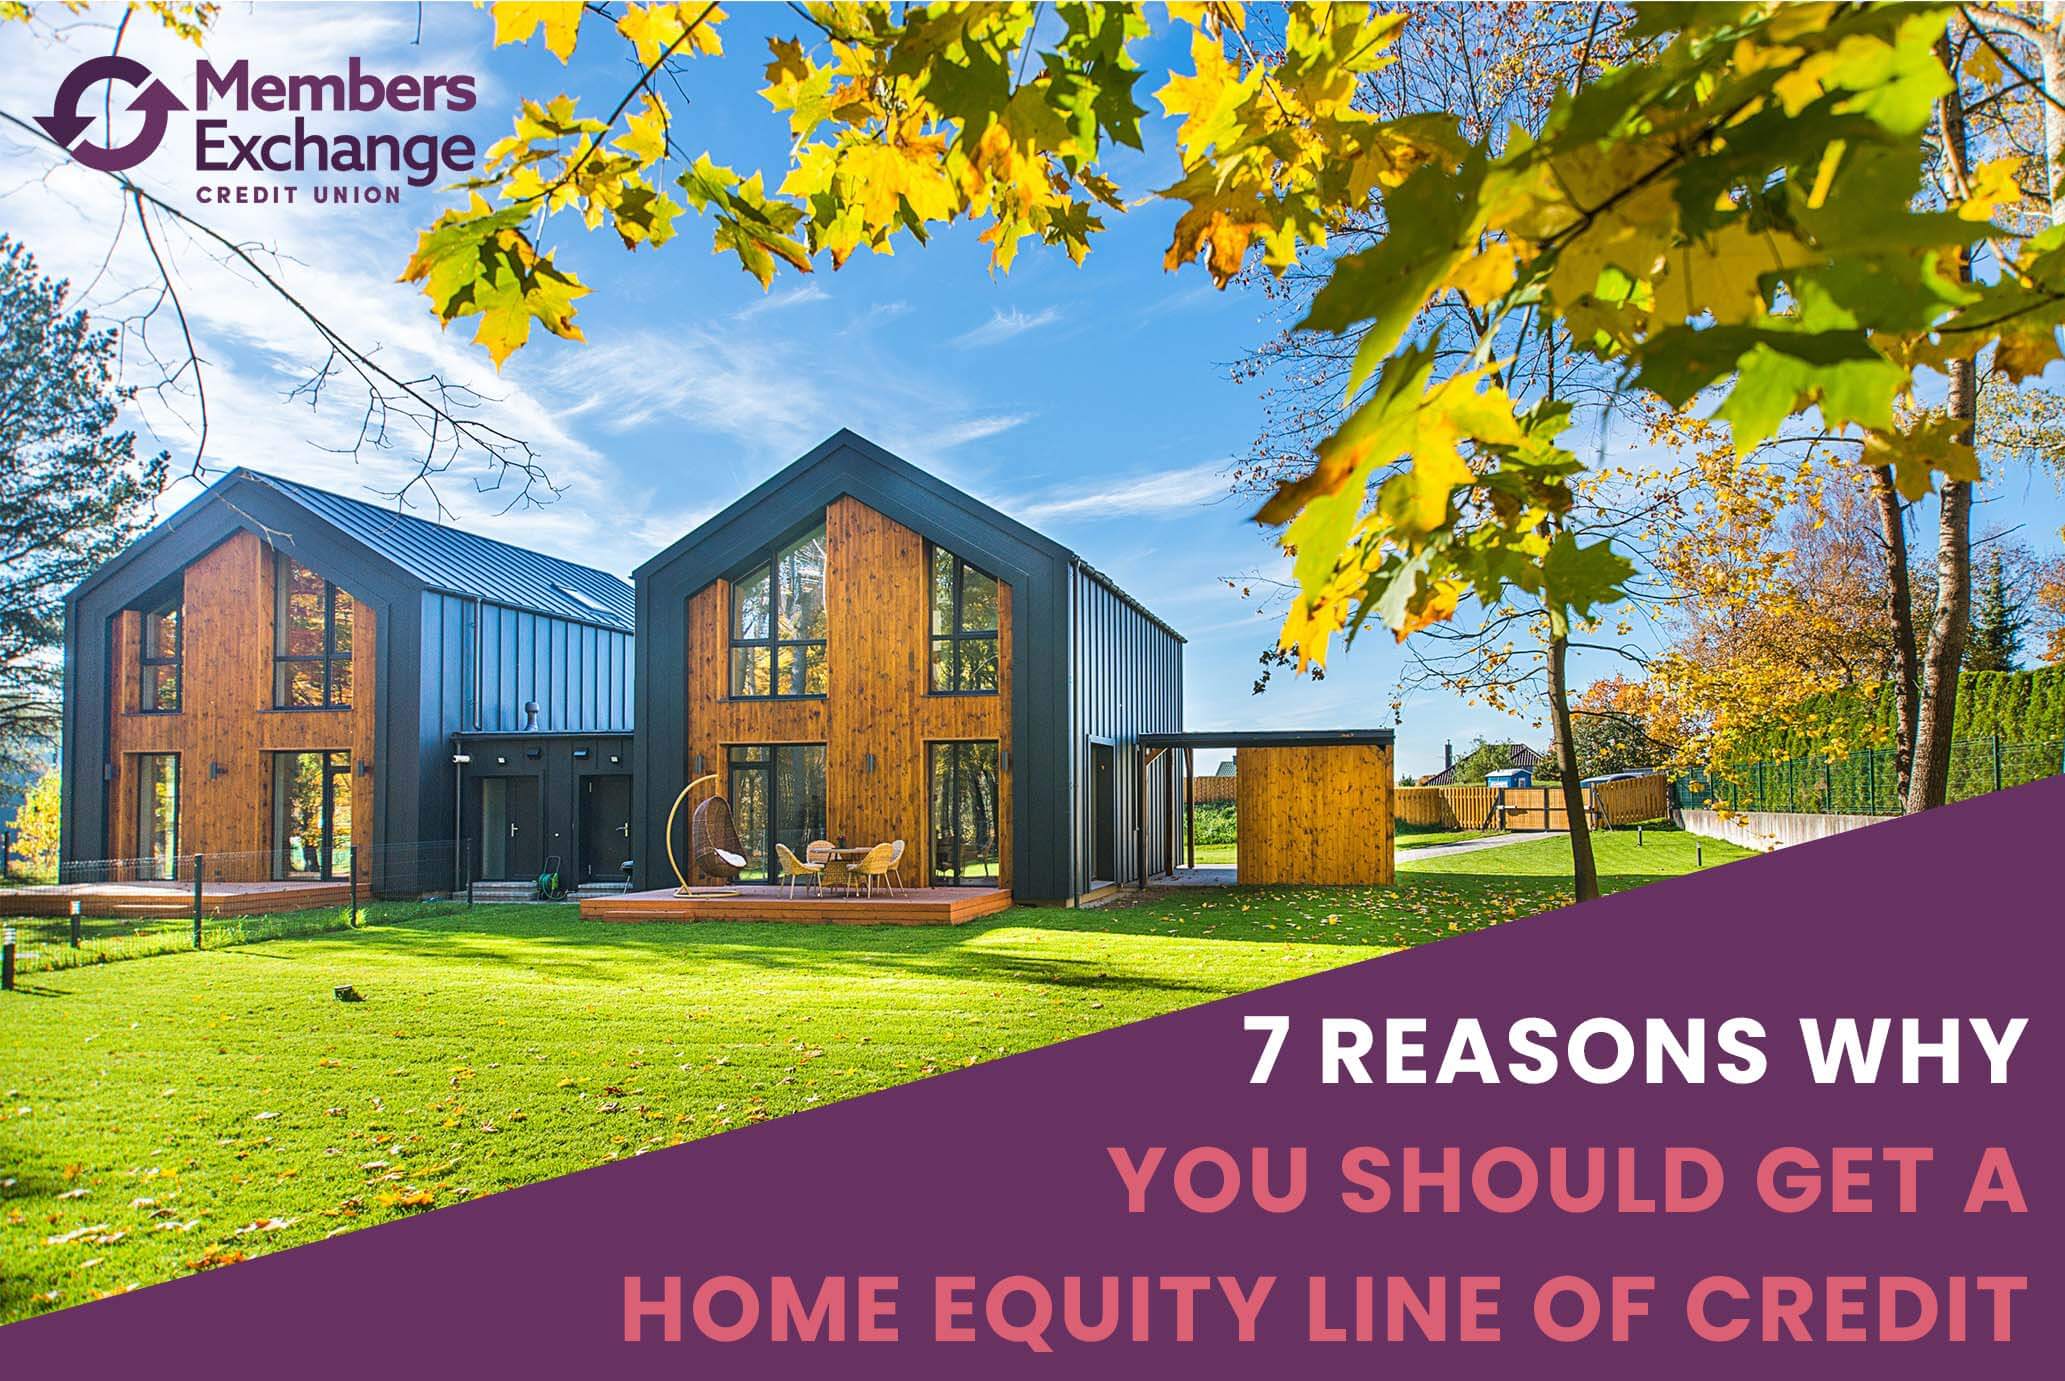 7-reasons-why-you-should-get-a-home-equity-line-of-credit-mecu